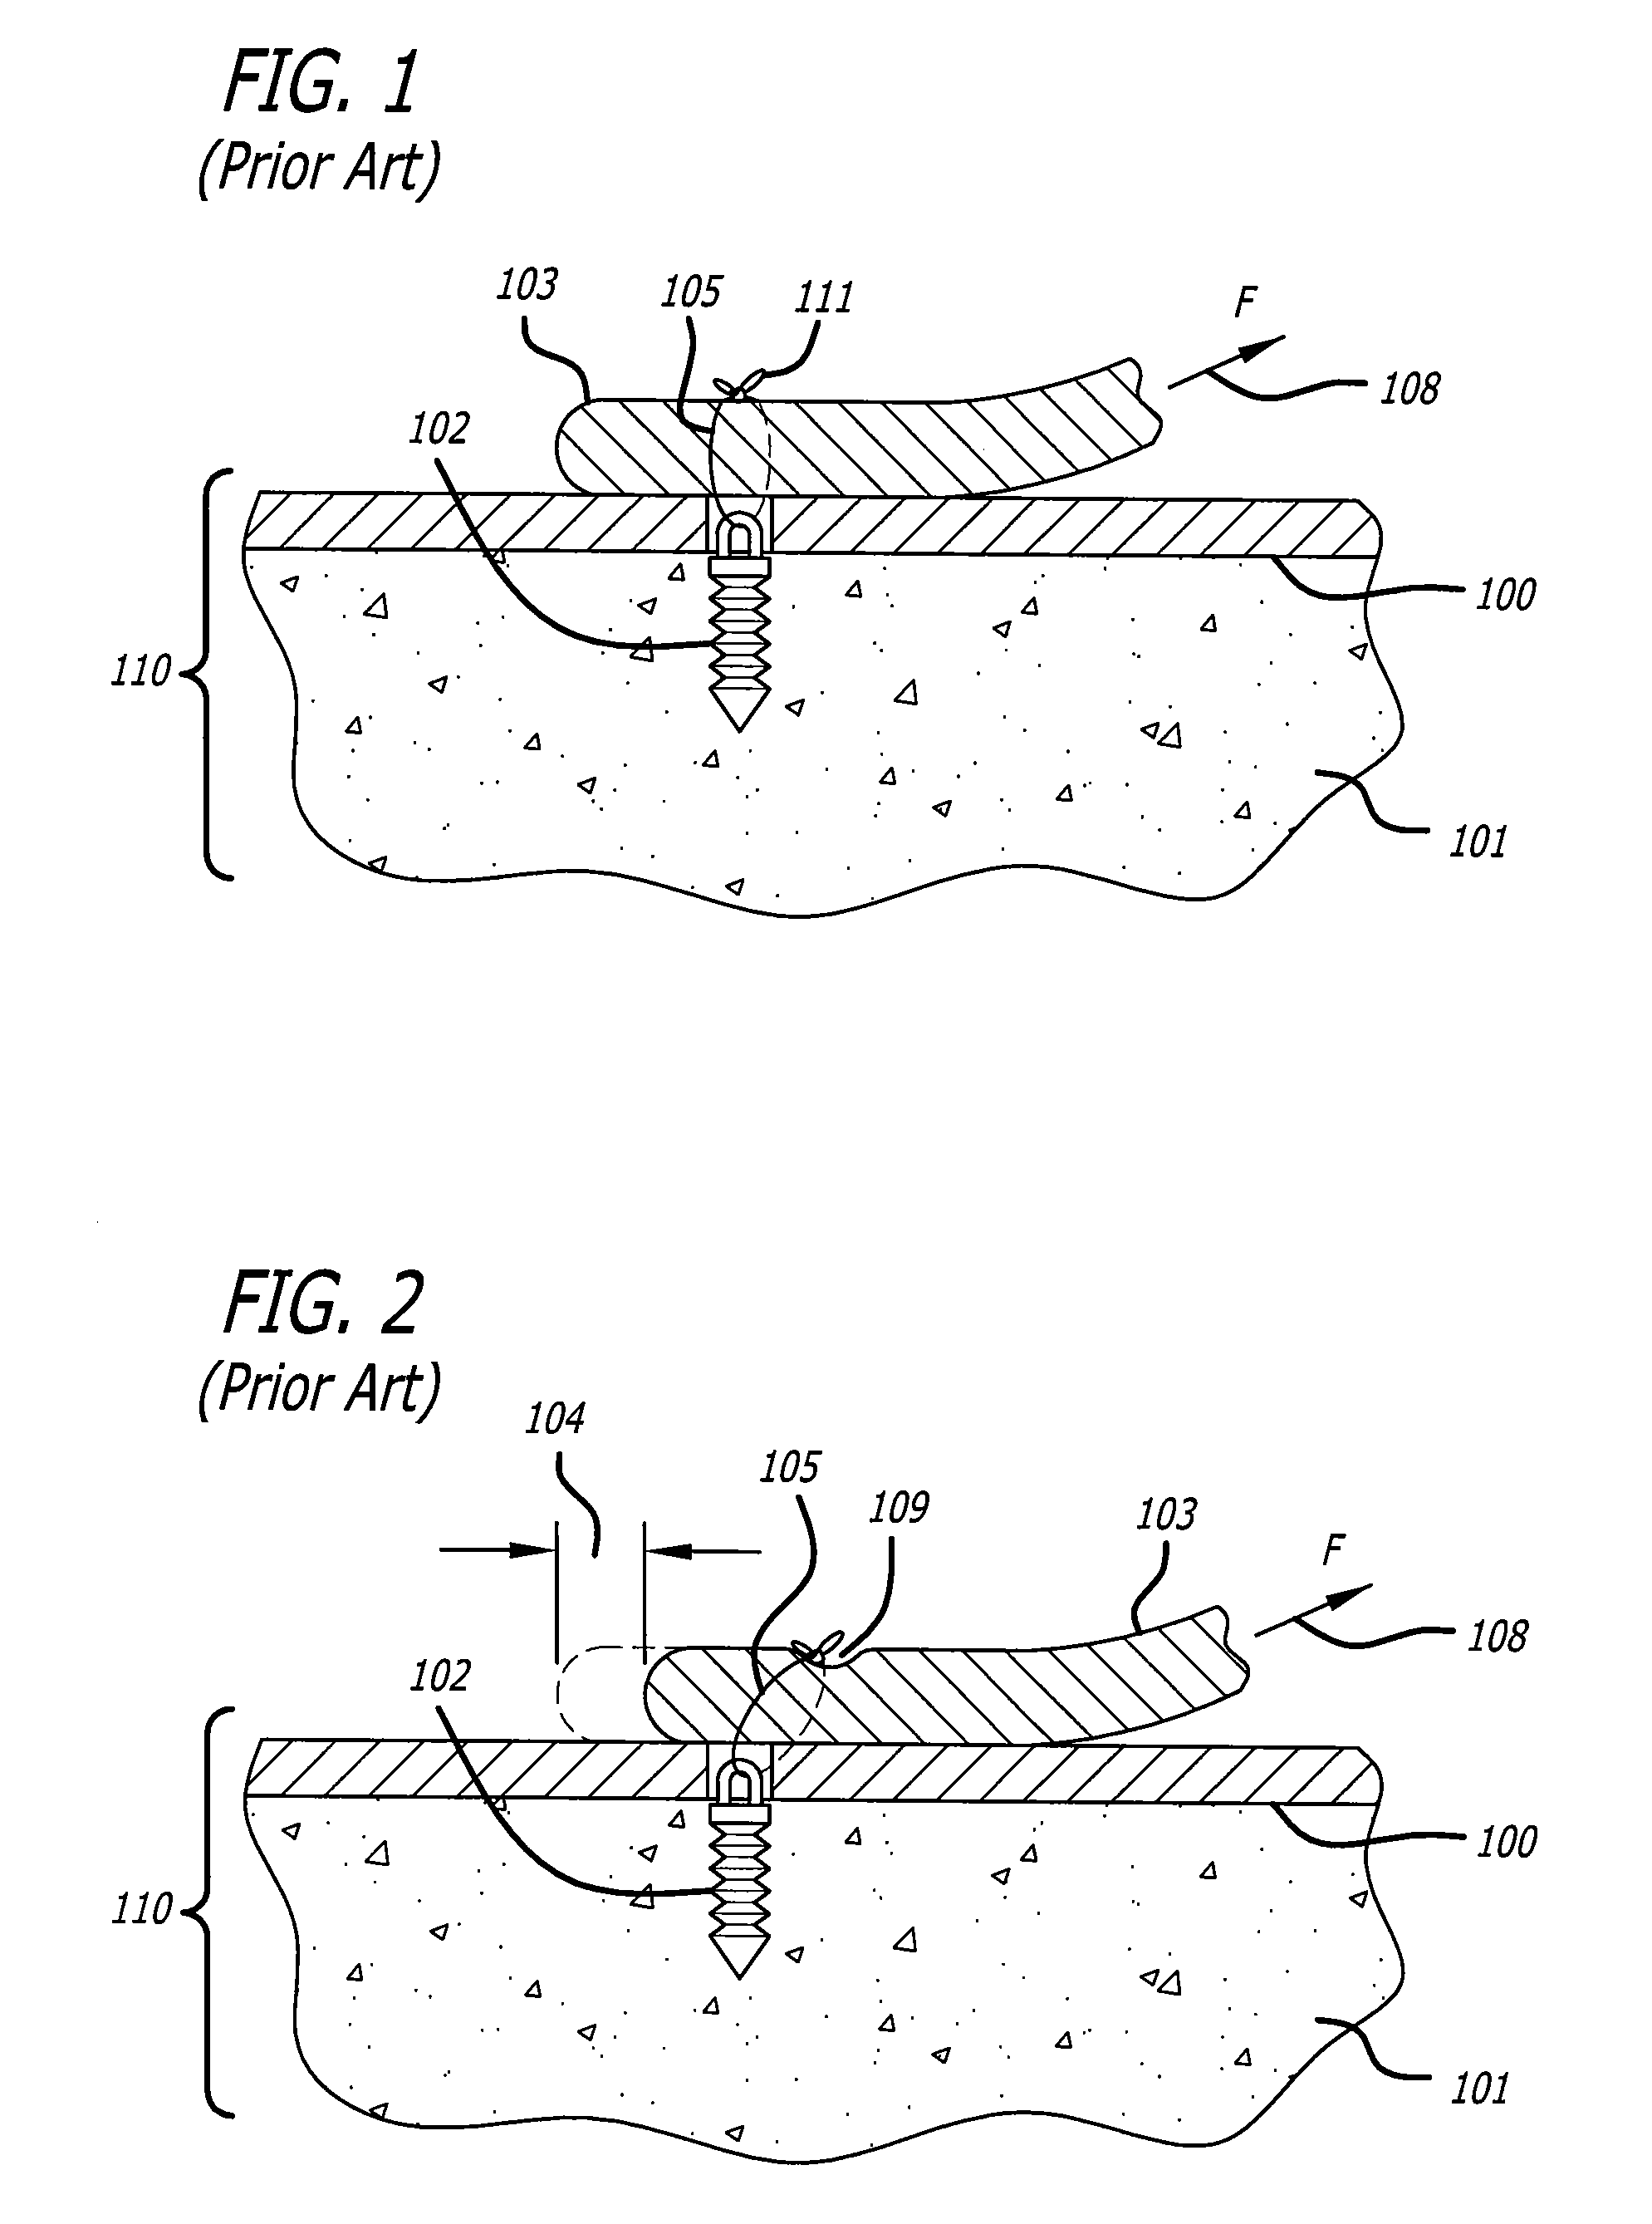 Insertion tool for knotless suture anchor for soft tissue repair and method of use